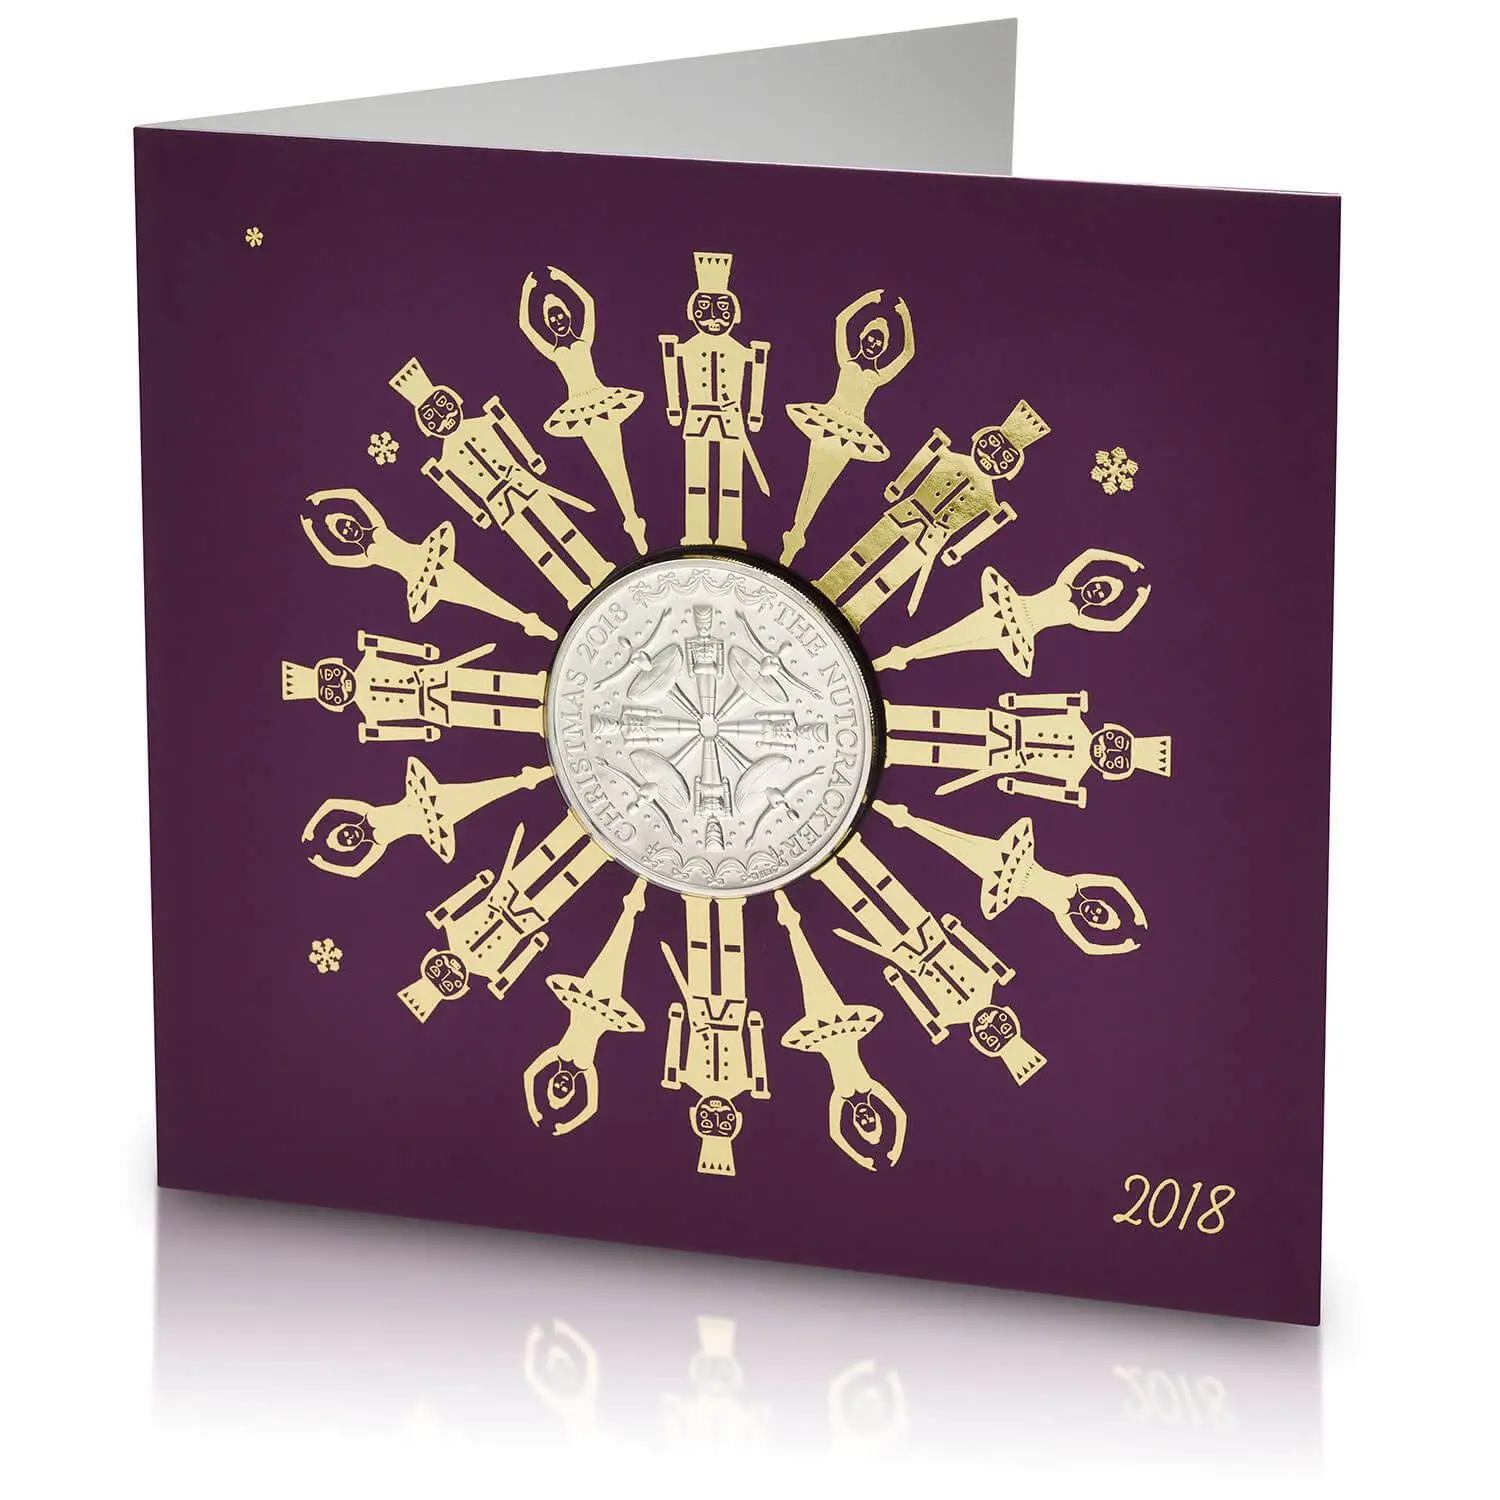 

2018 British Nutcracker 5 Pounds Commemorative Coin Official Card Binder Snowflake as Beautiful and Special Design